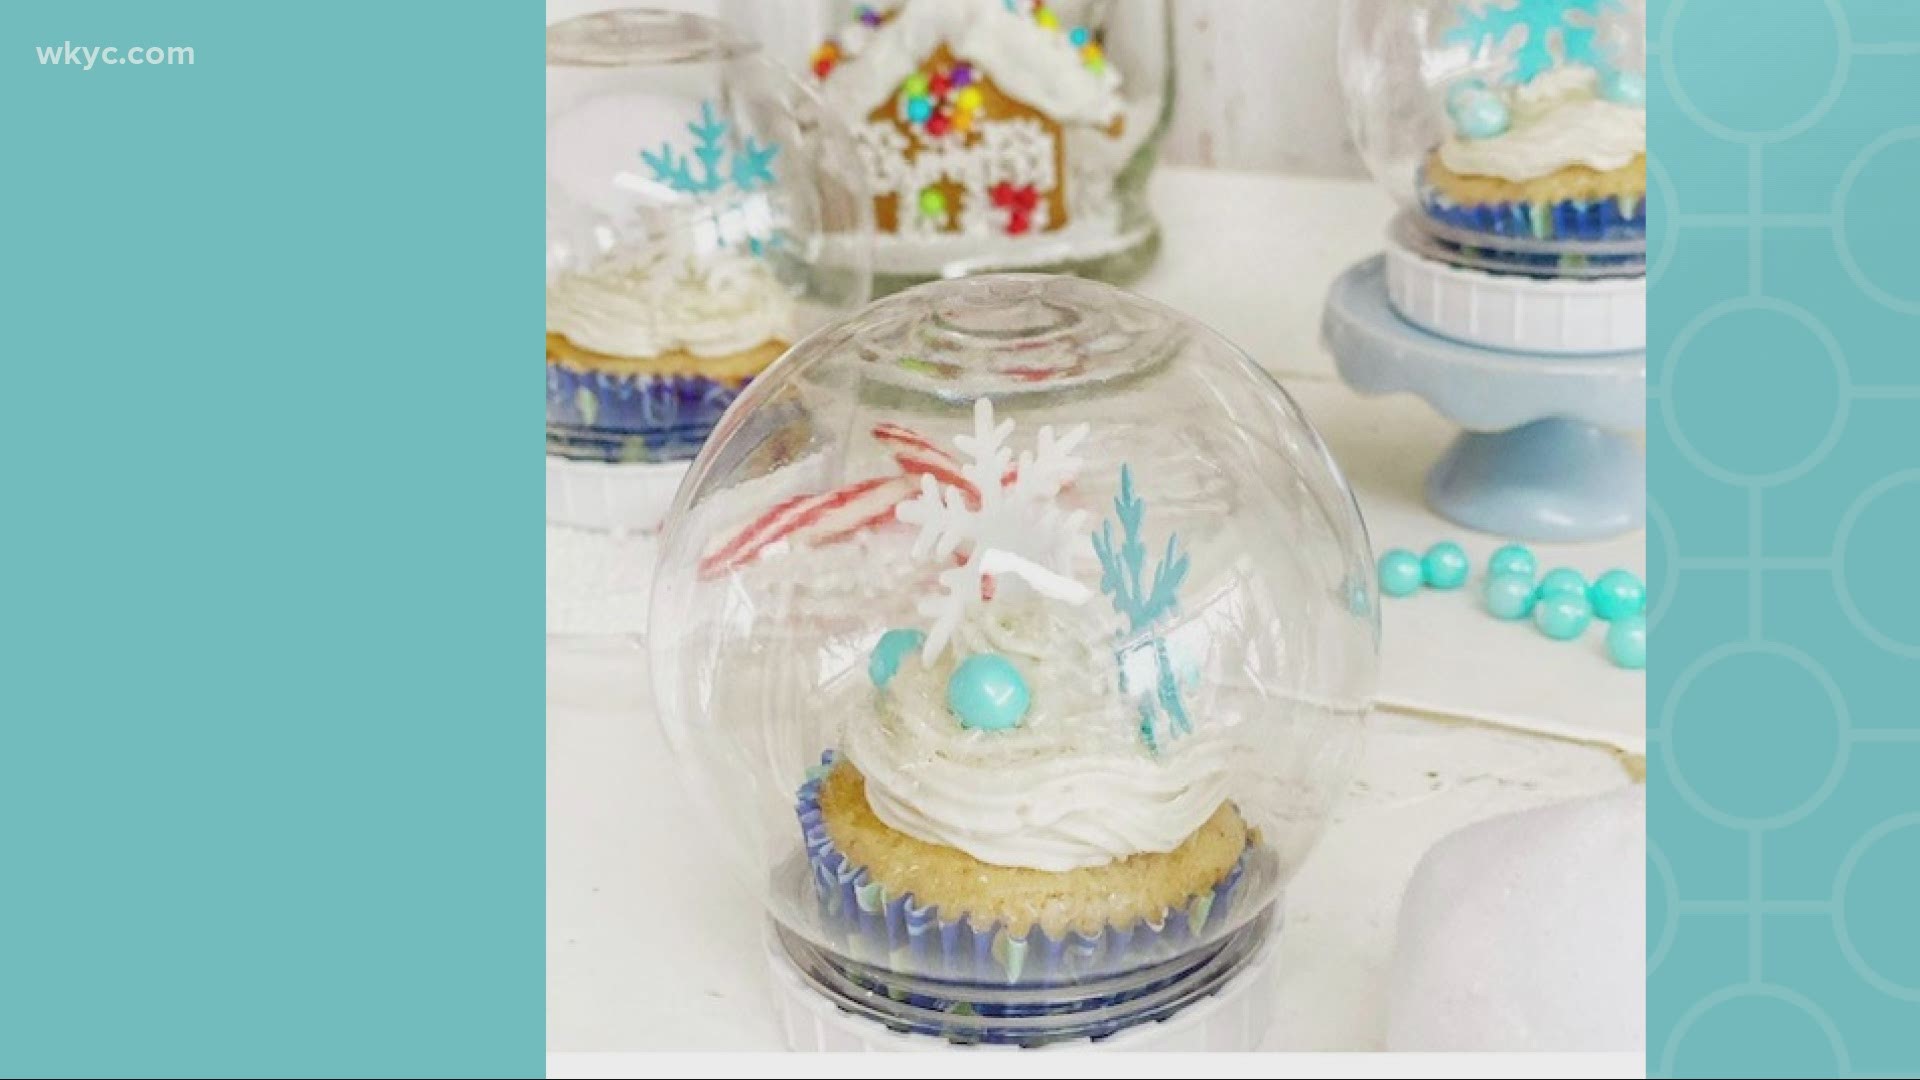 Looking for a fun treat to cook up with your family? Here's a recipe for 'snow globe cupcakes.'